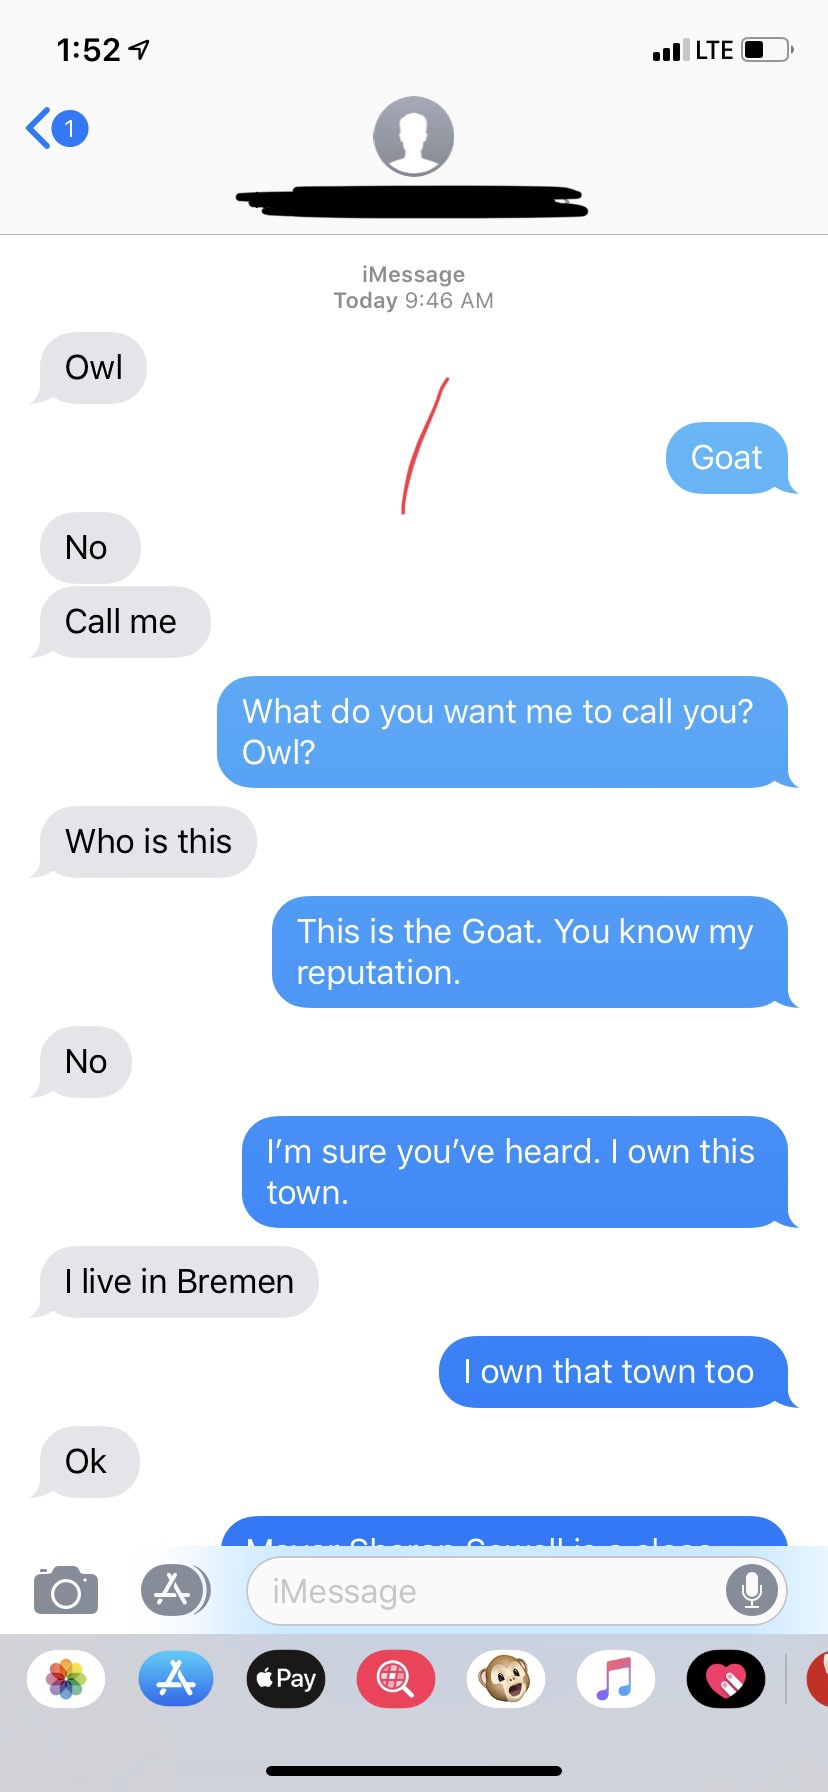 relationship goals - ., Lte O To iMessage Today Owl Goat No Call me What do you want me to call you? Owl? Who is this This is the Goat. You know my reputation. No No I'm sure you've heard. I own this town. I live in Bremen I own that town too Ok O iMessag